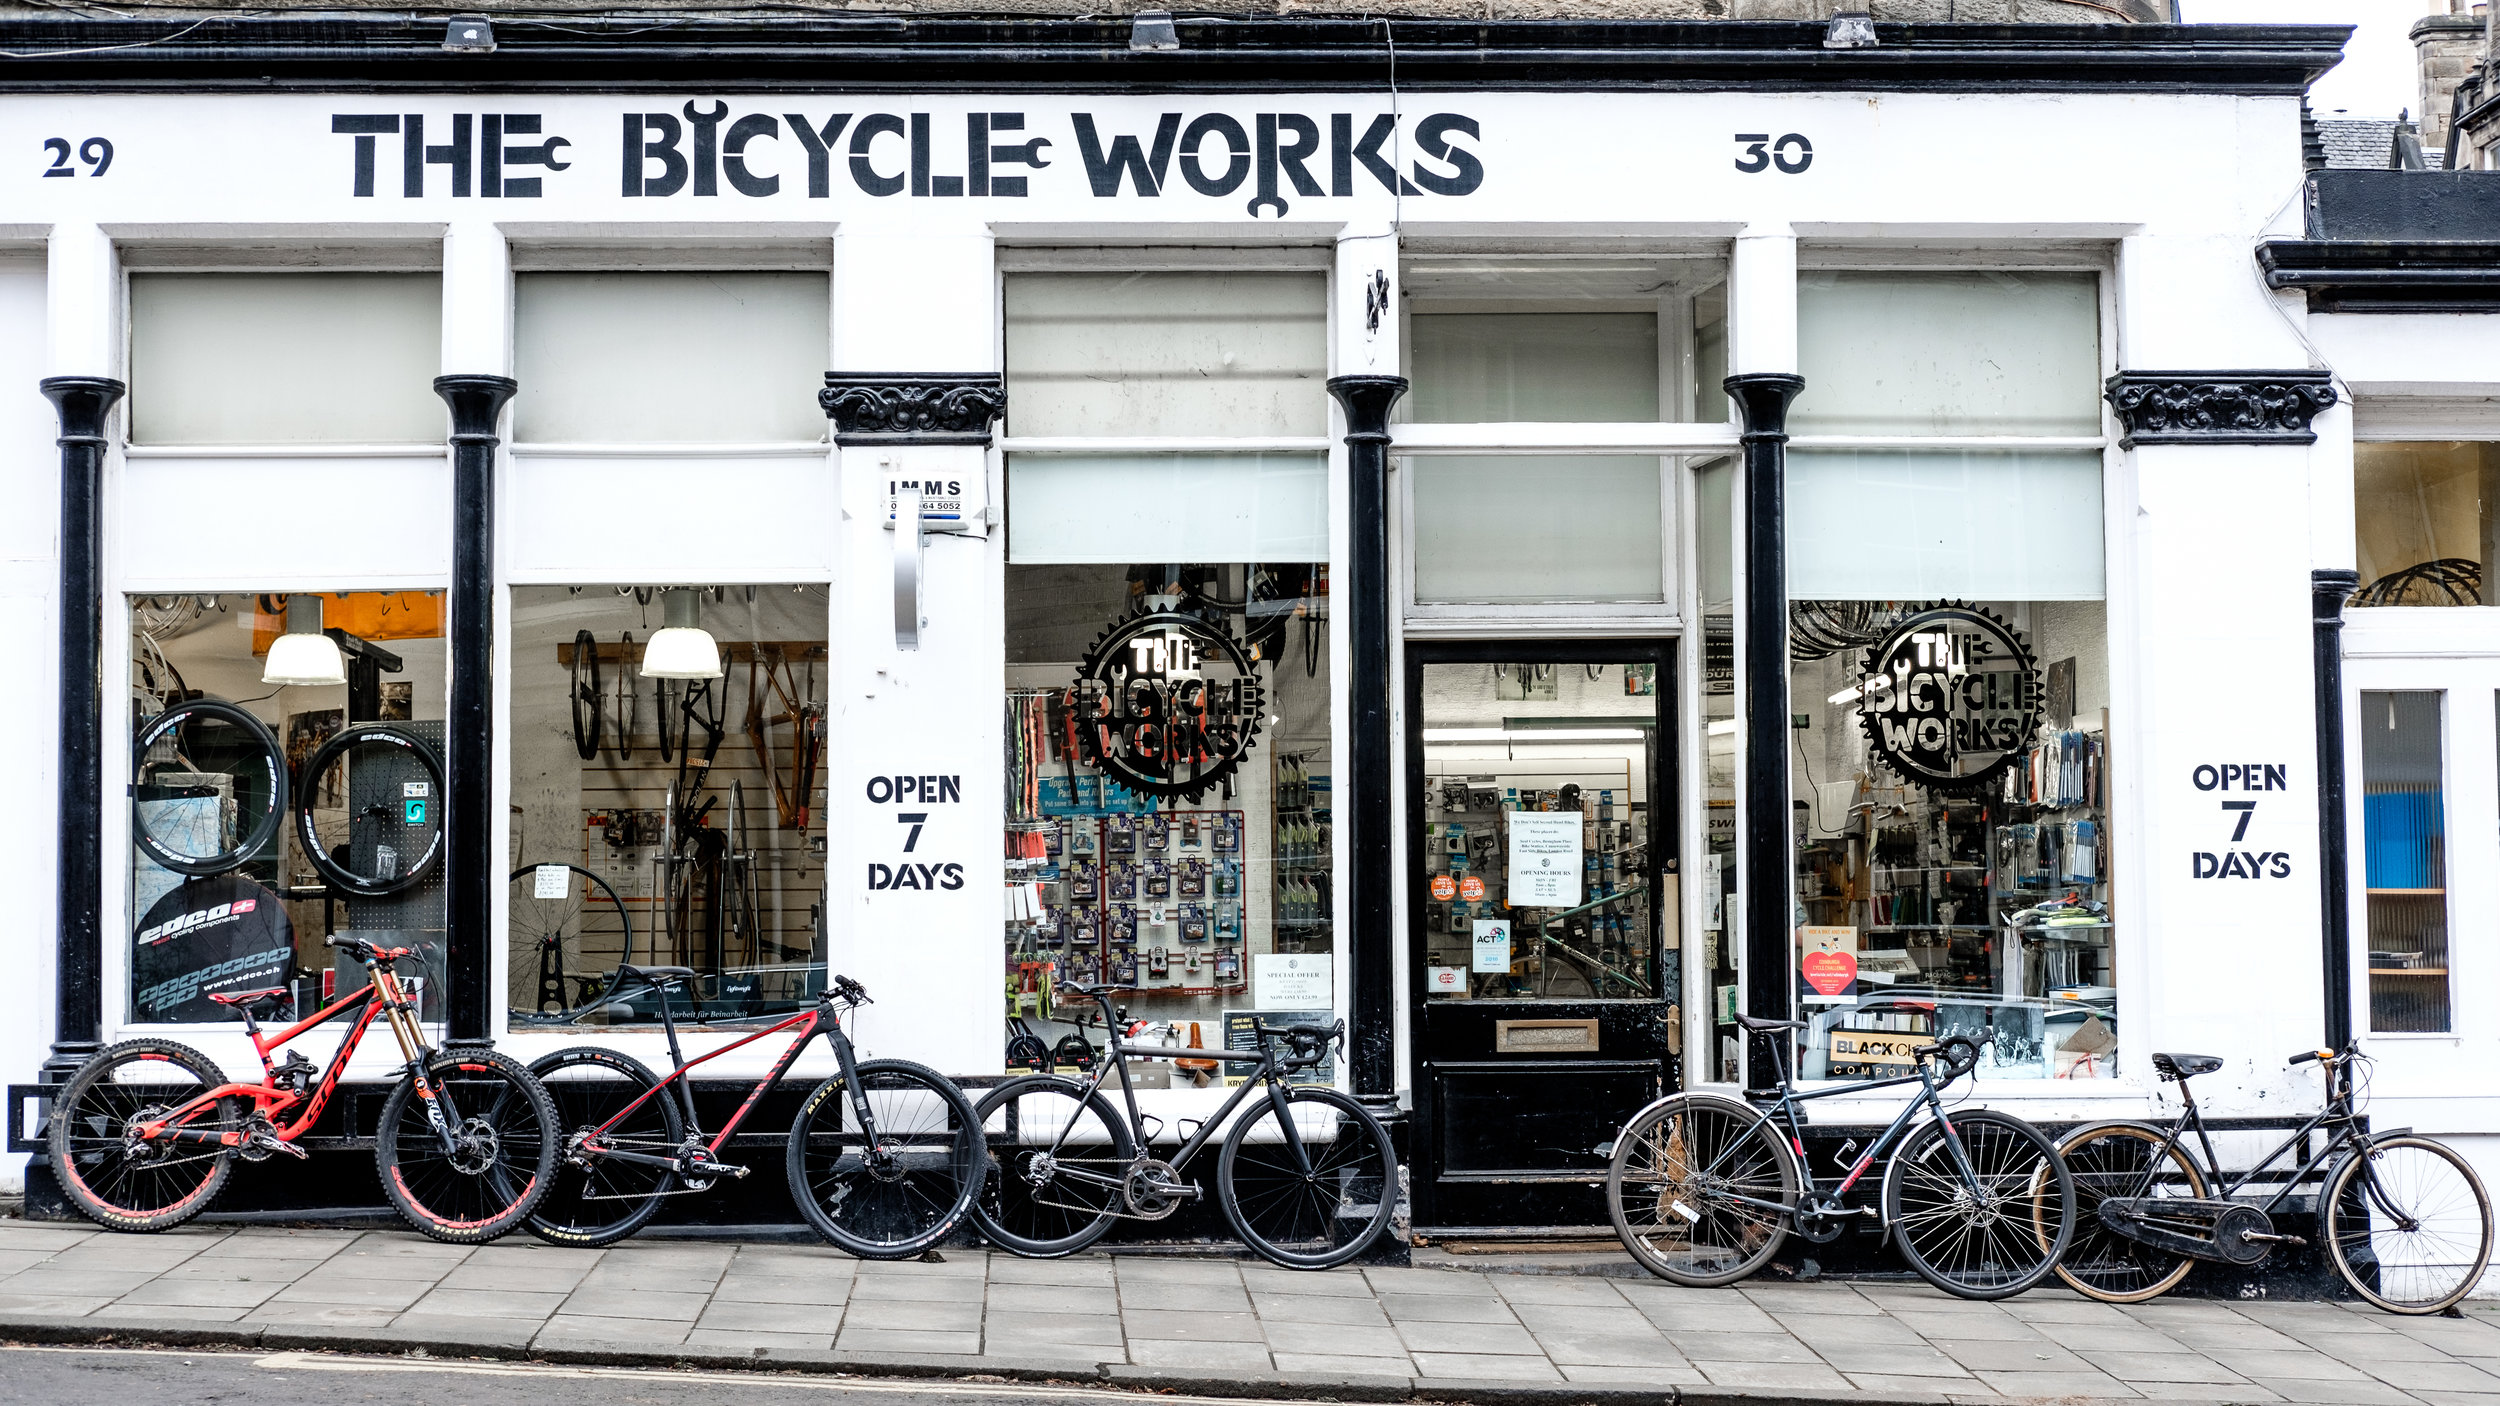 Welcome to the Bicycle Works, Edinburgh.